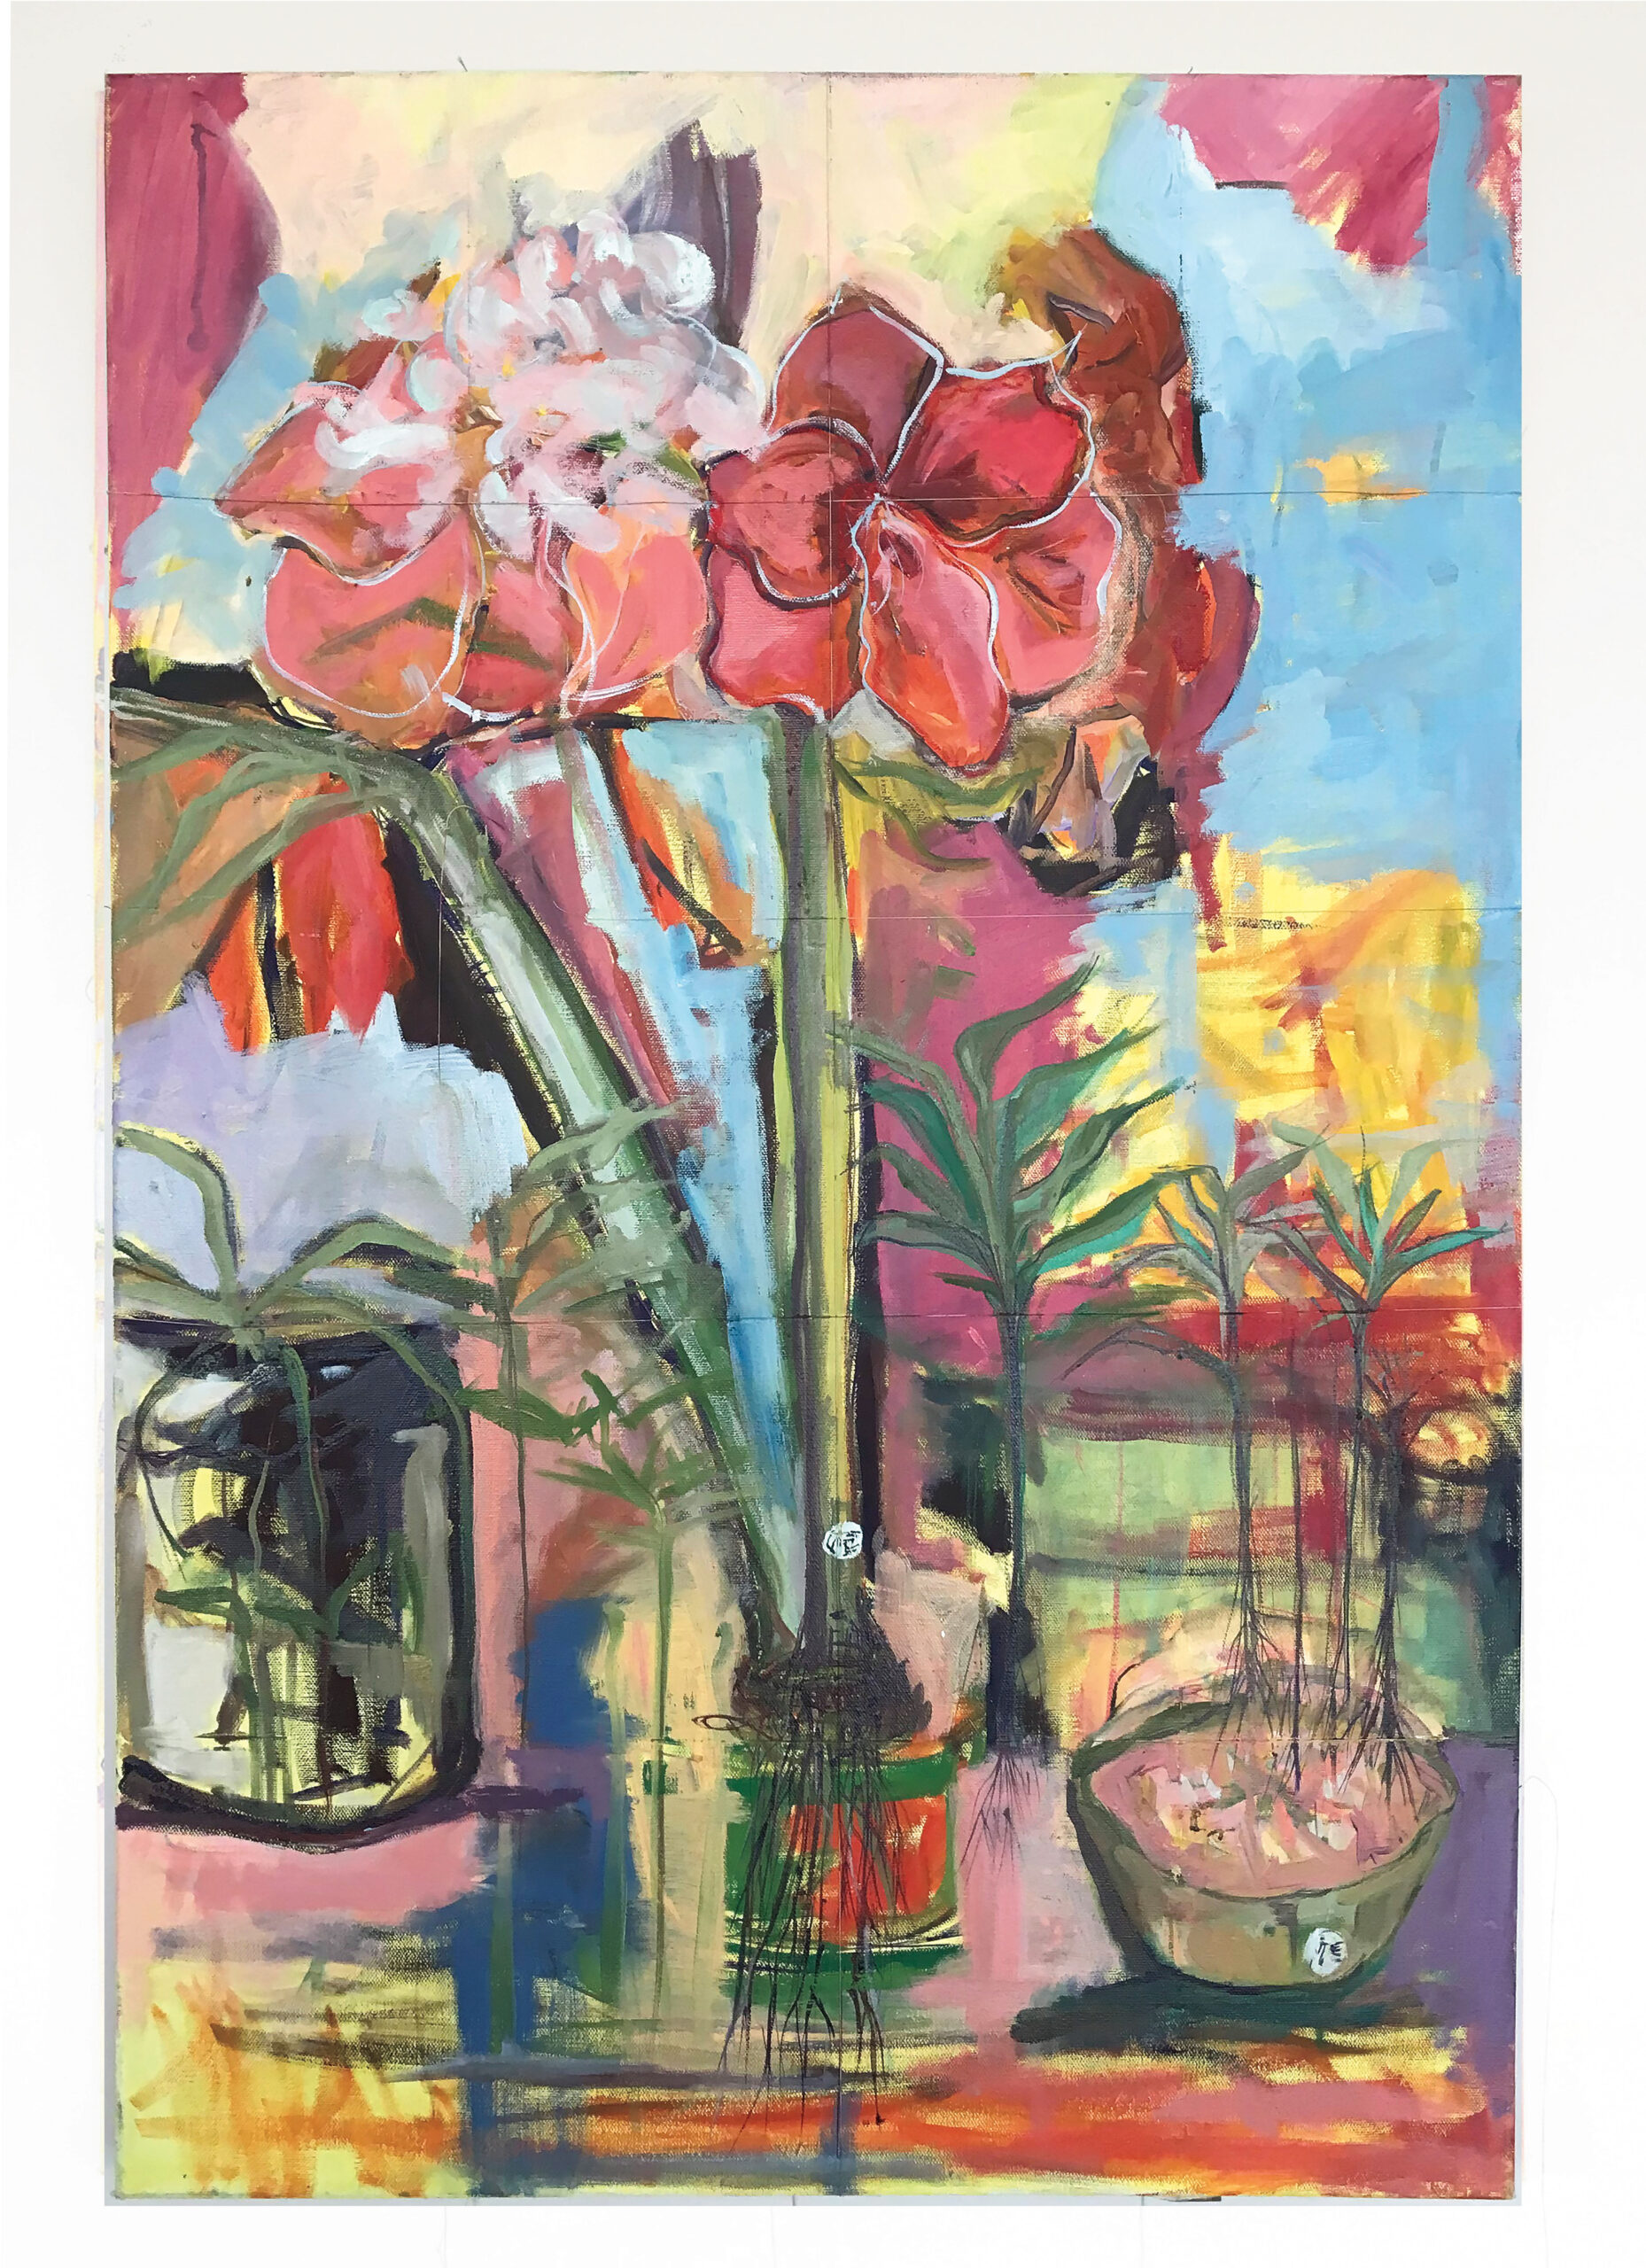 A painting of brightly colored flowers in bloom.